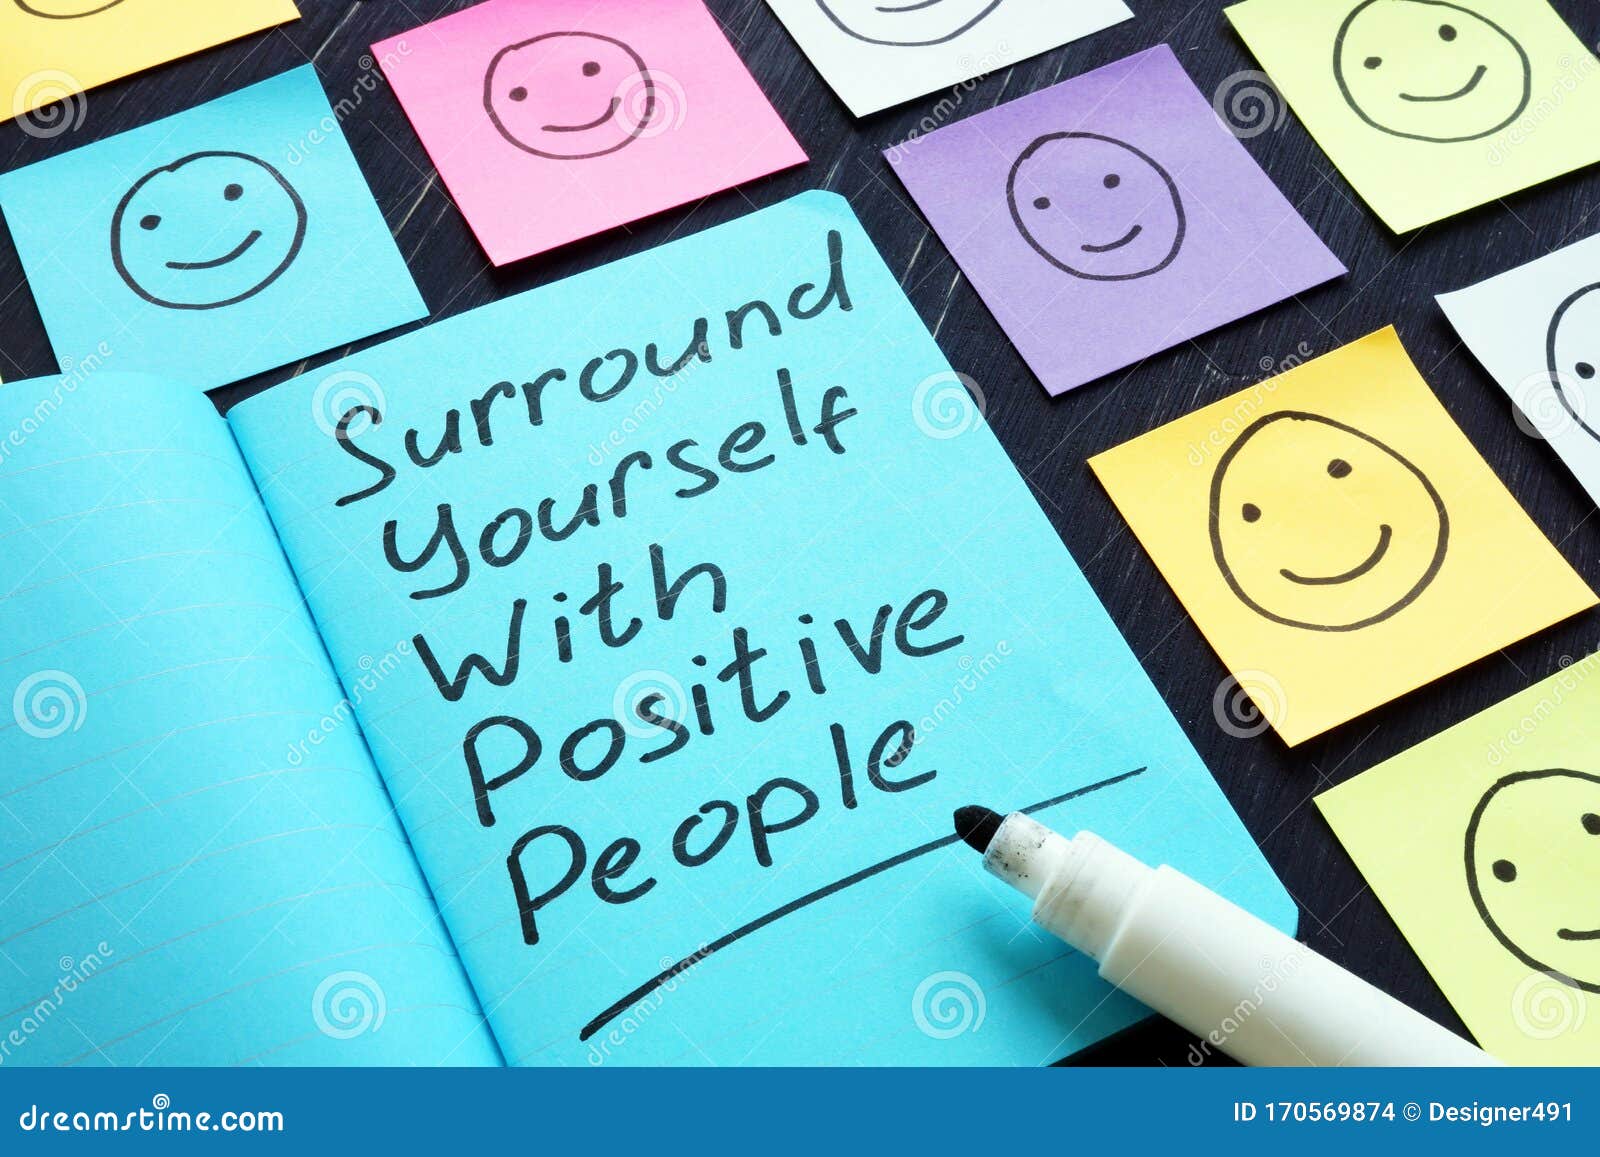 surround yourself with positive people motivation phrase